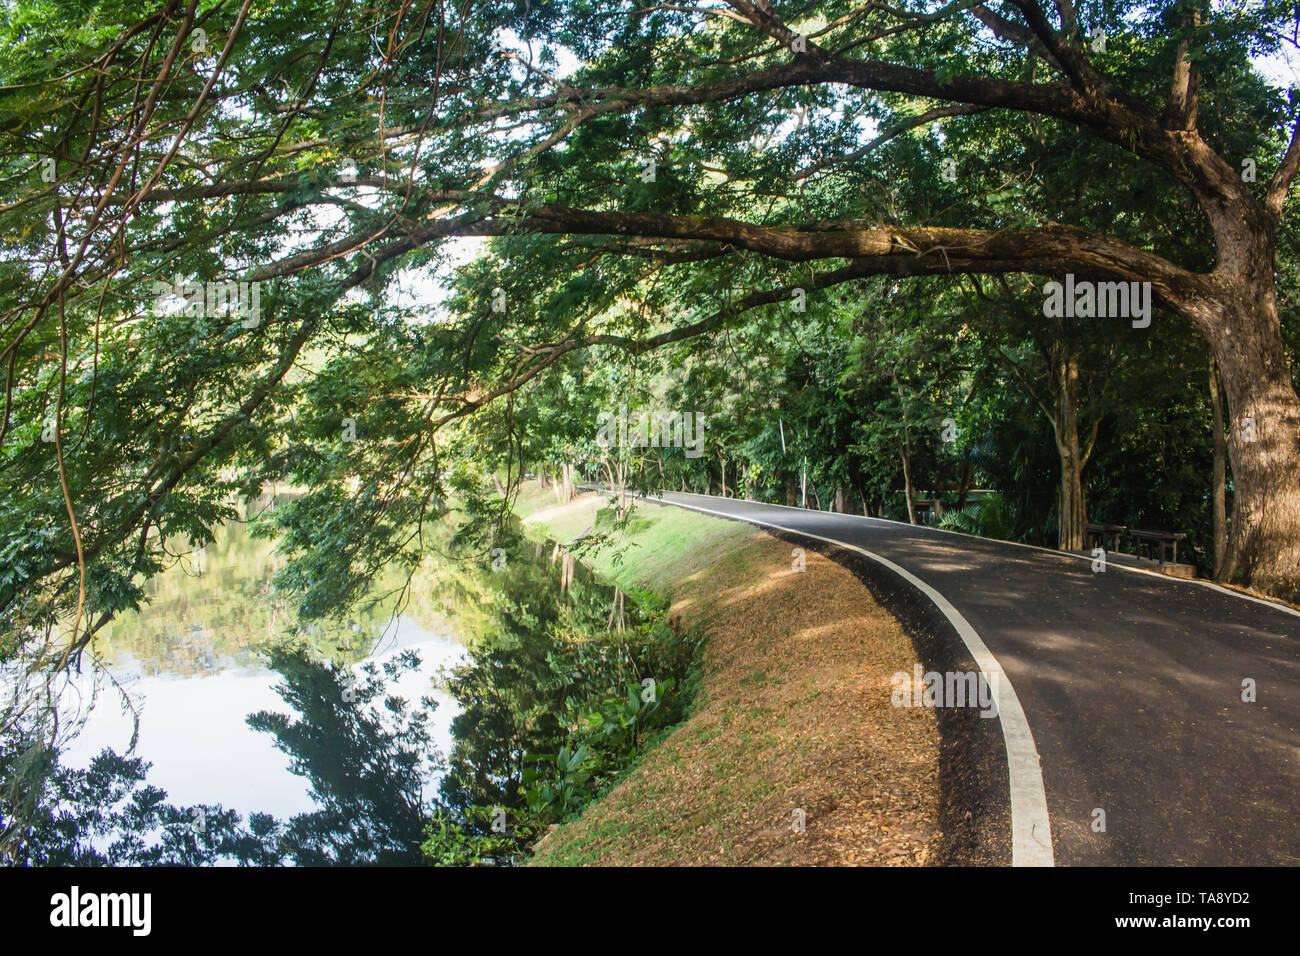 Empty asphalt road between trees and lake in Ang Kaew Reservoir. Massive tree with branches blocking the sun. Stock Photo